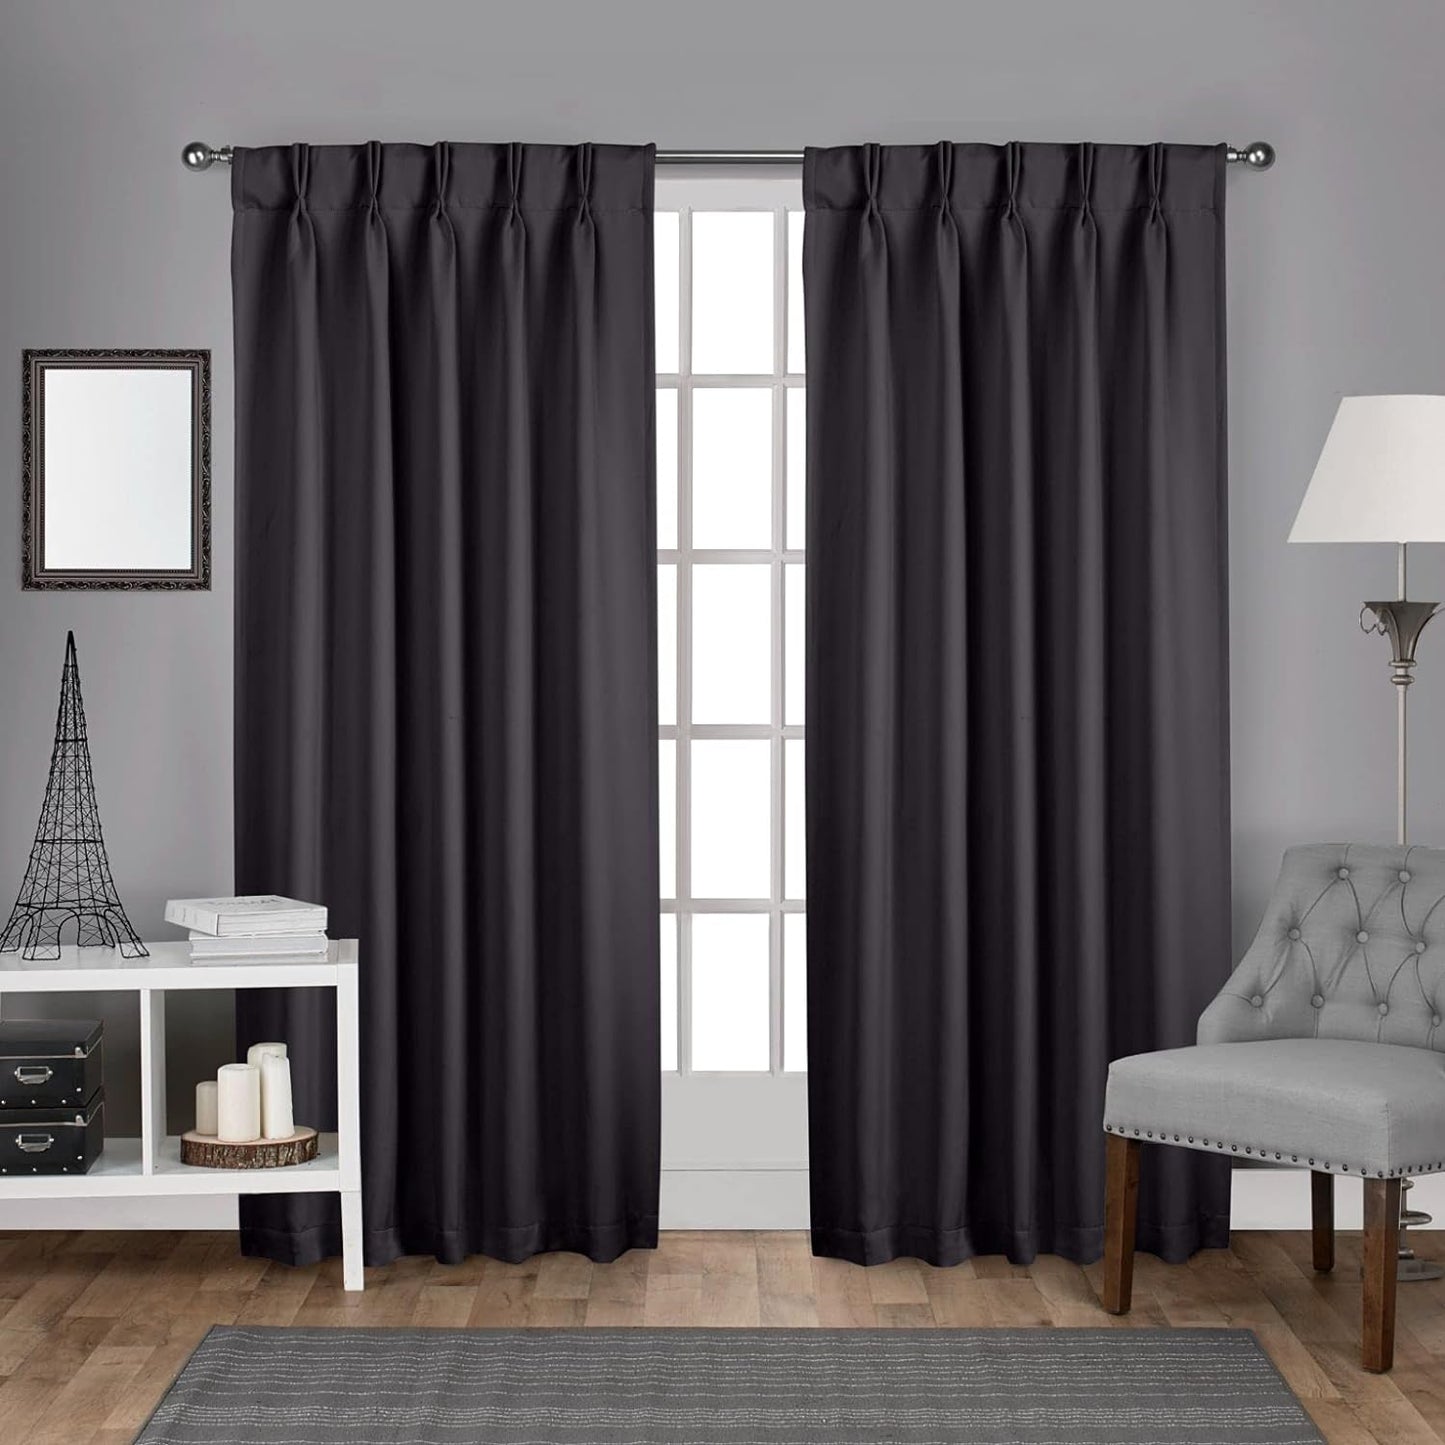 Exclusive Home Sateen Twill Woven Room Darkening Blackout Pinch Pleat/Hidden Tab Top Curtain Panel Pair, 63" Length, Charcoal  Exclusive Home Curtains Charcoal 84" Length 